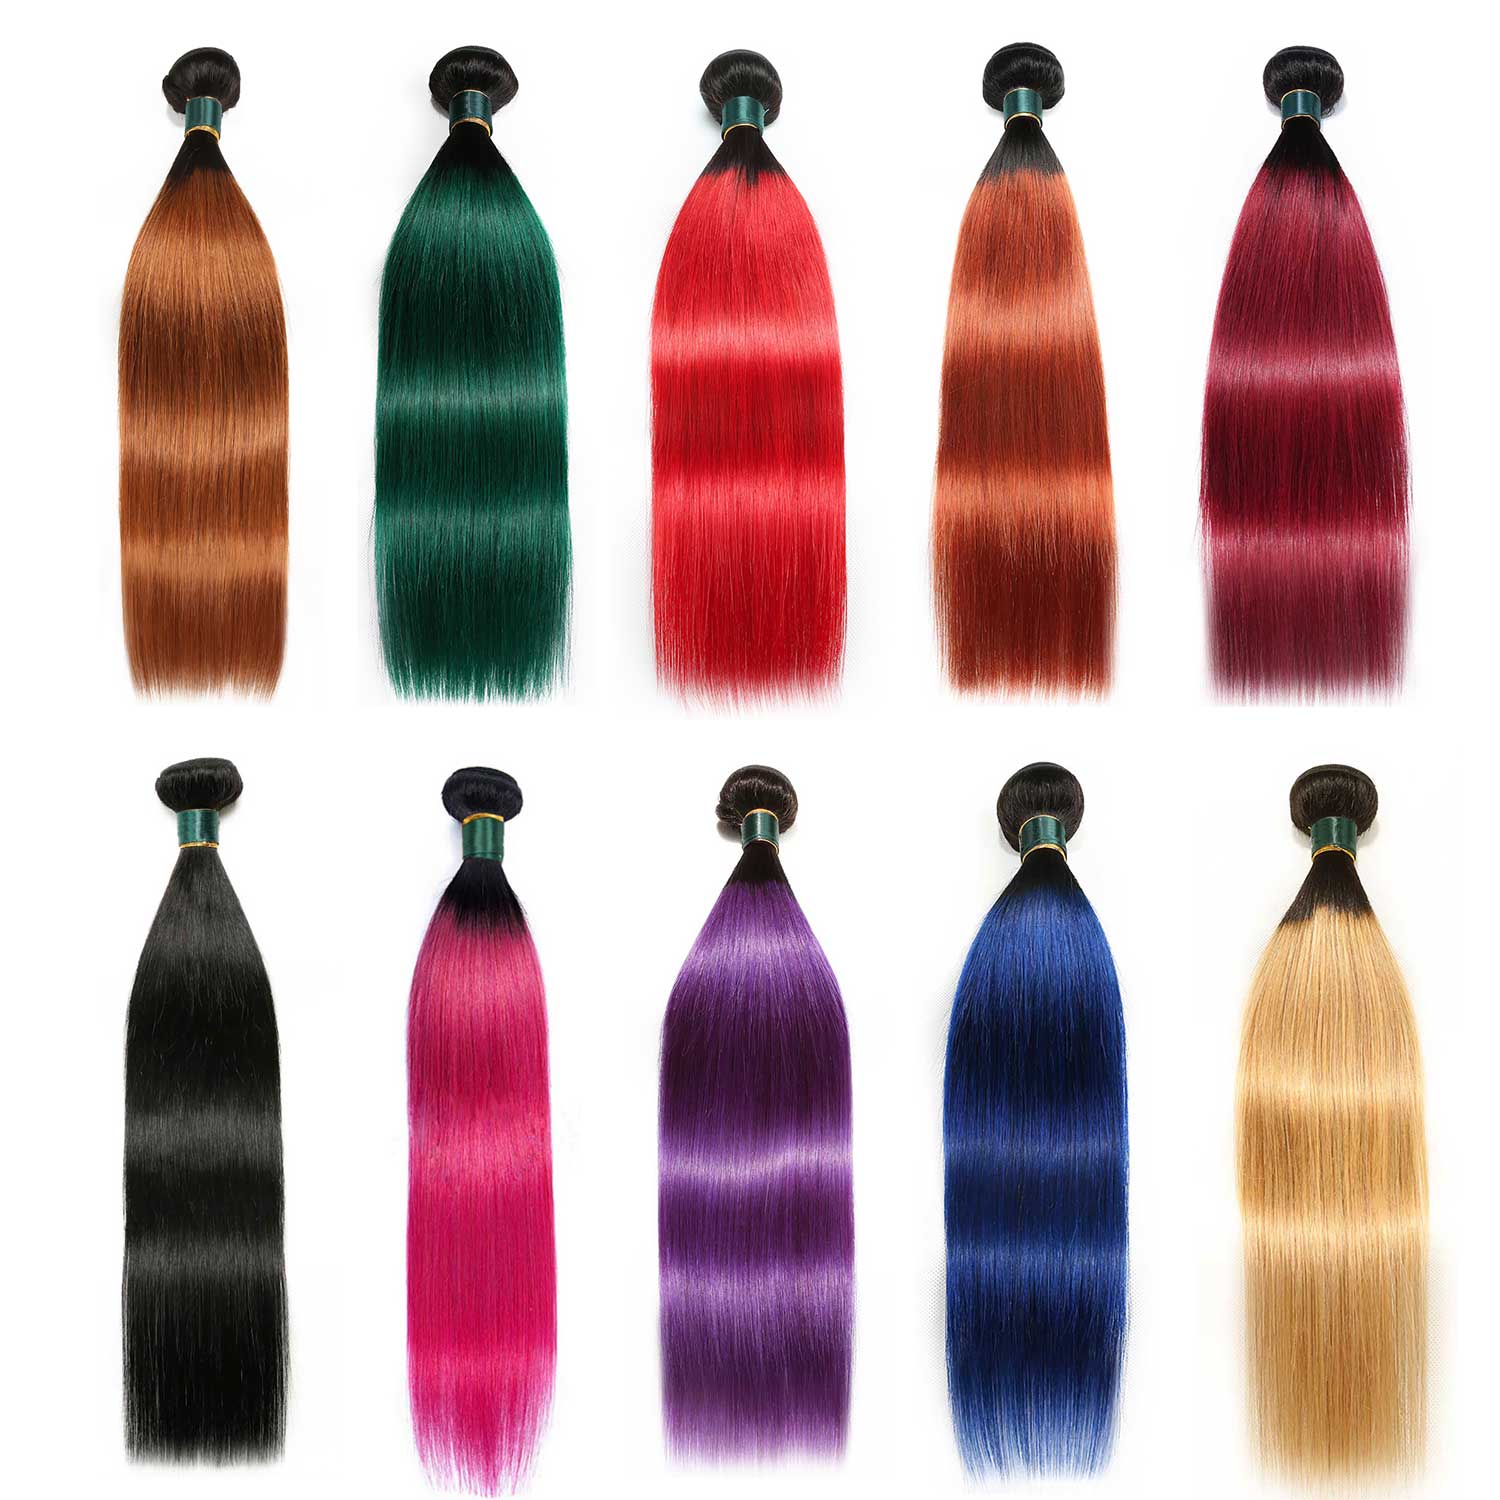 Colored Human Hair Weave Bundles with Dark Roots 100g